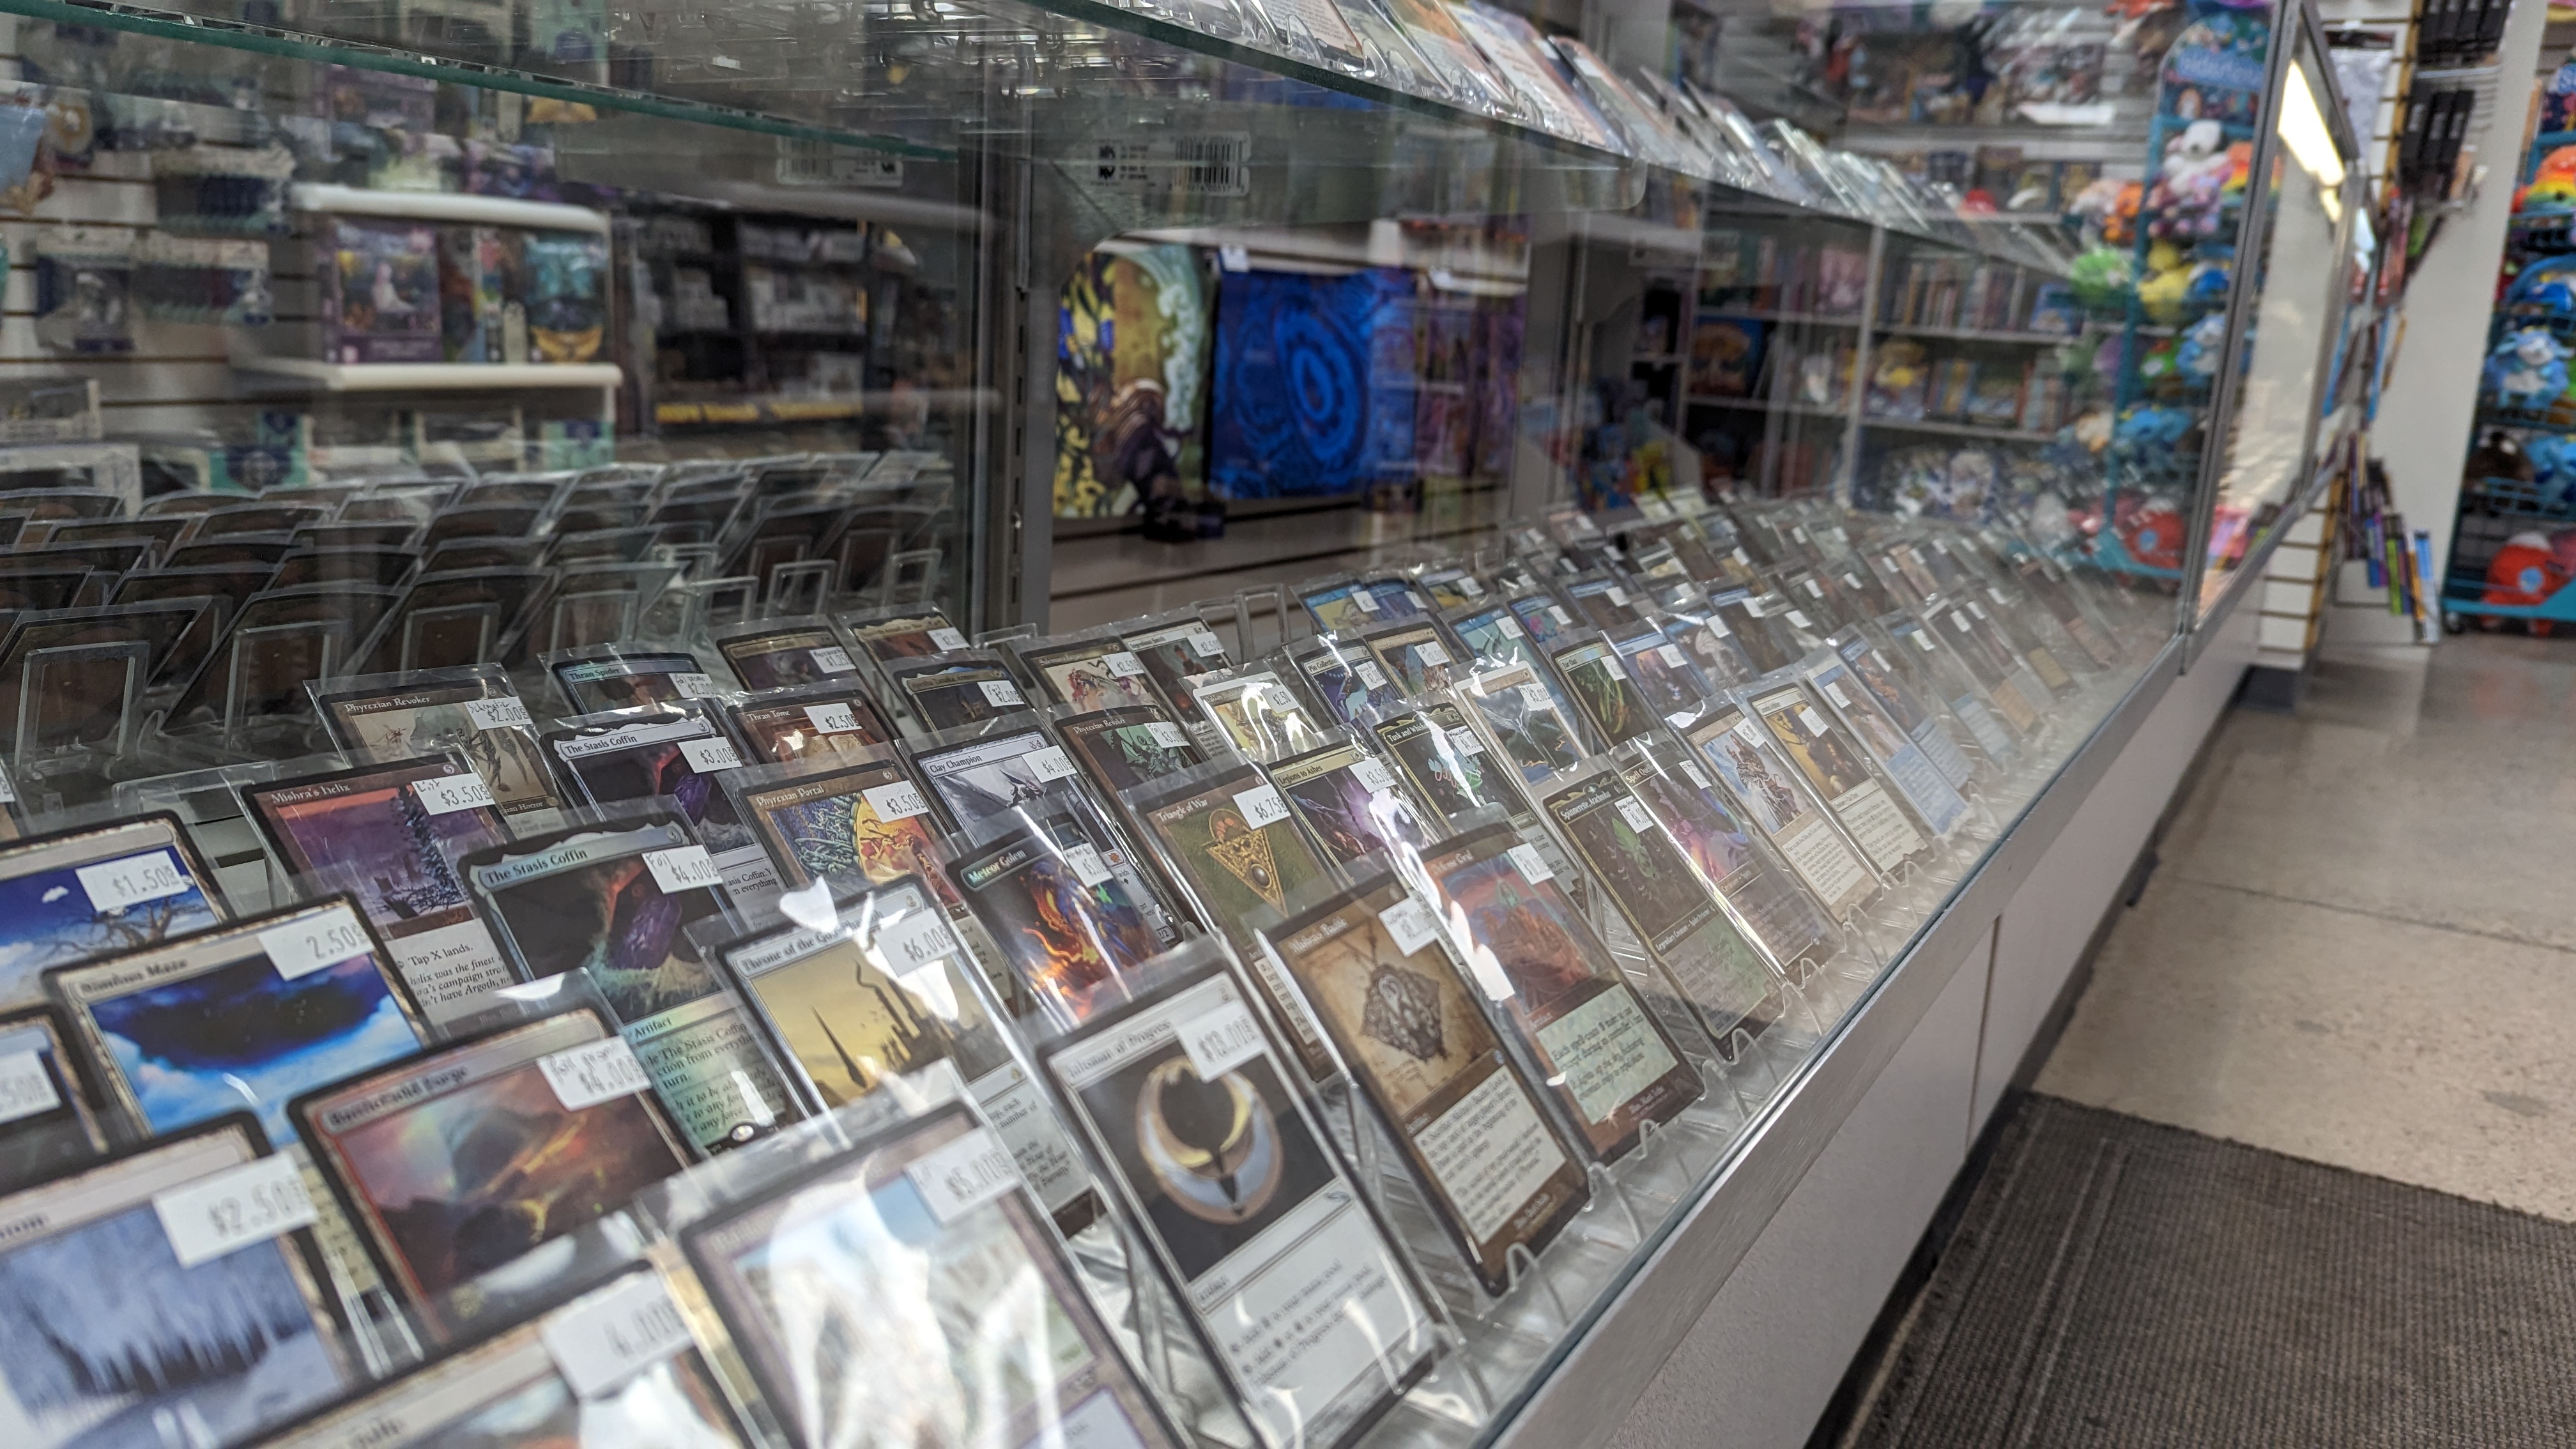 Rows of Magic: the Gathering singles